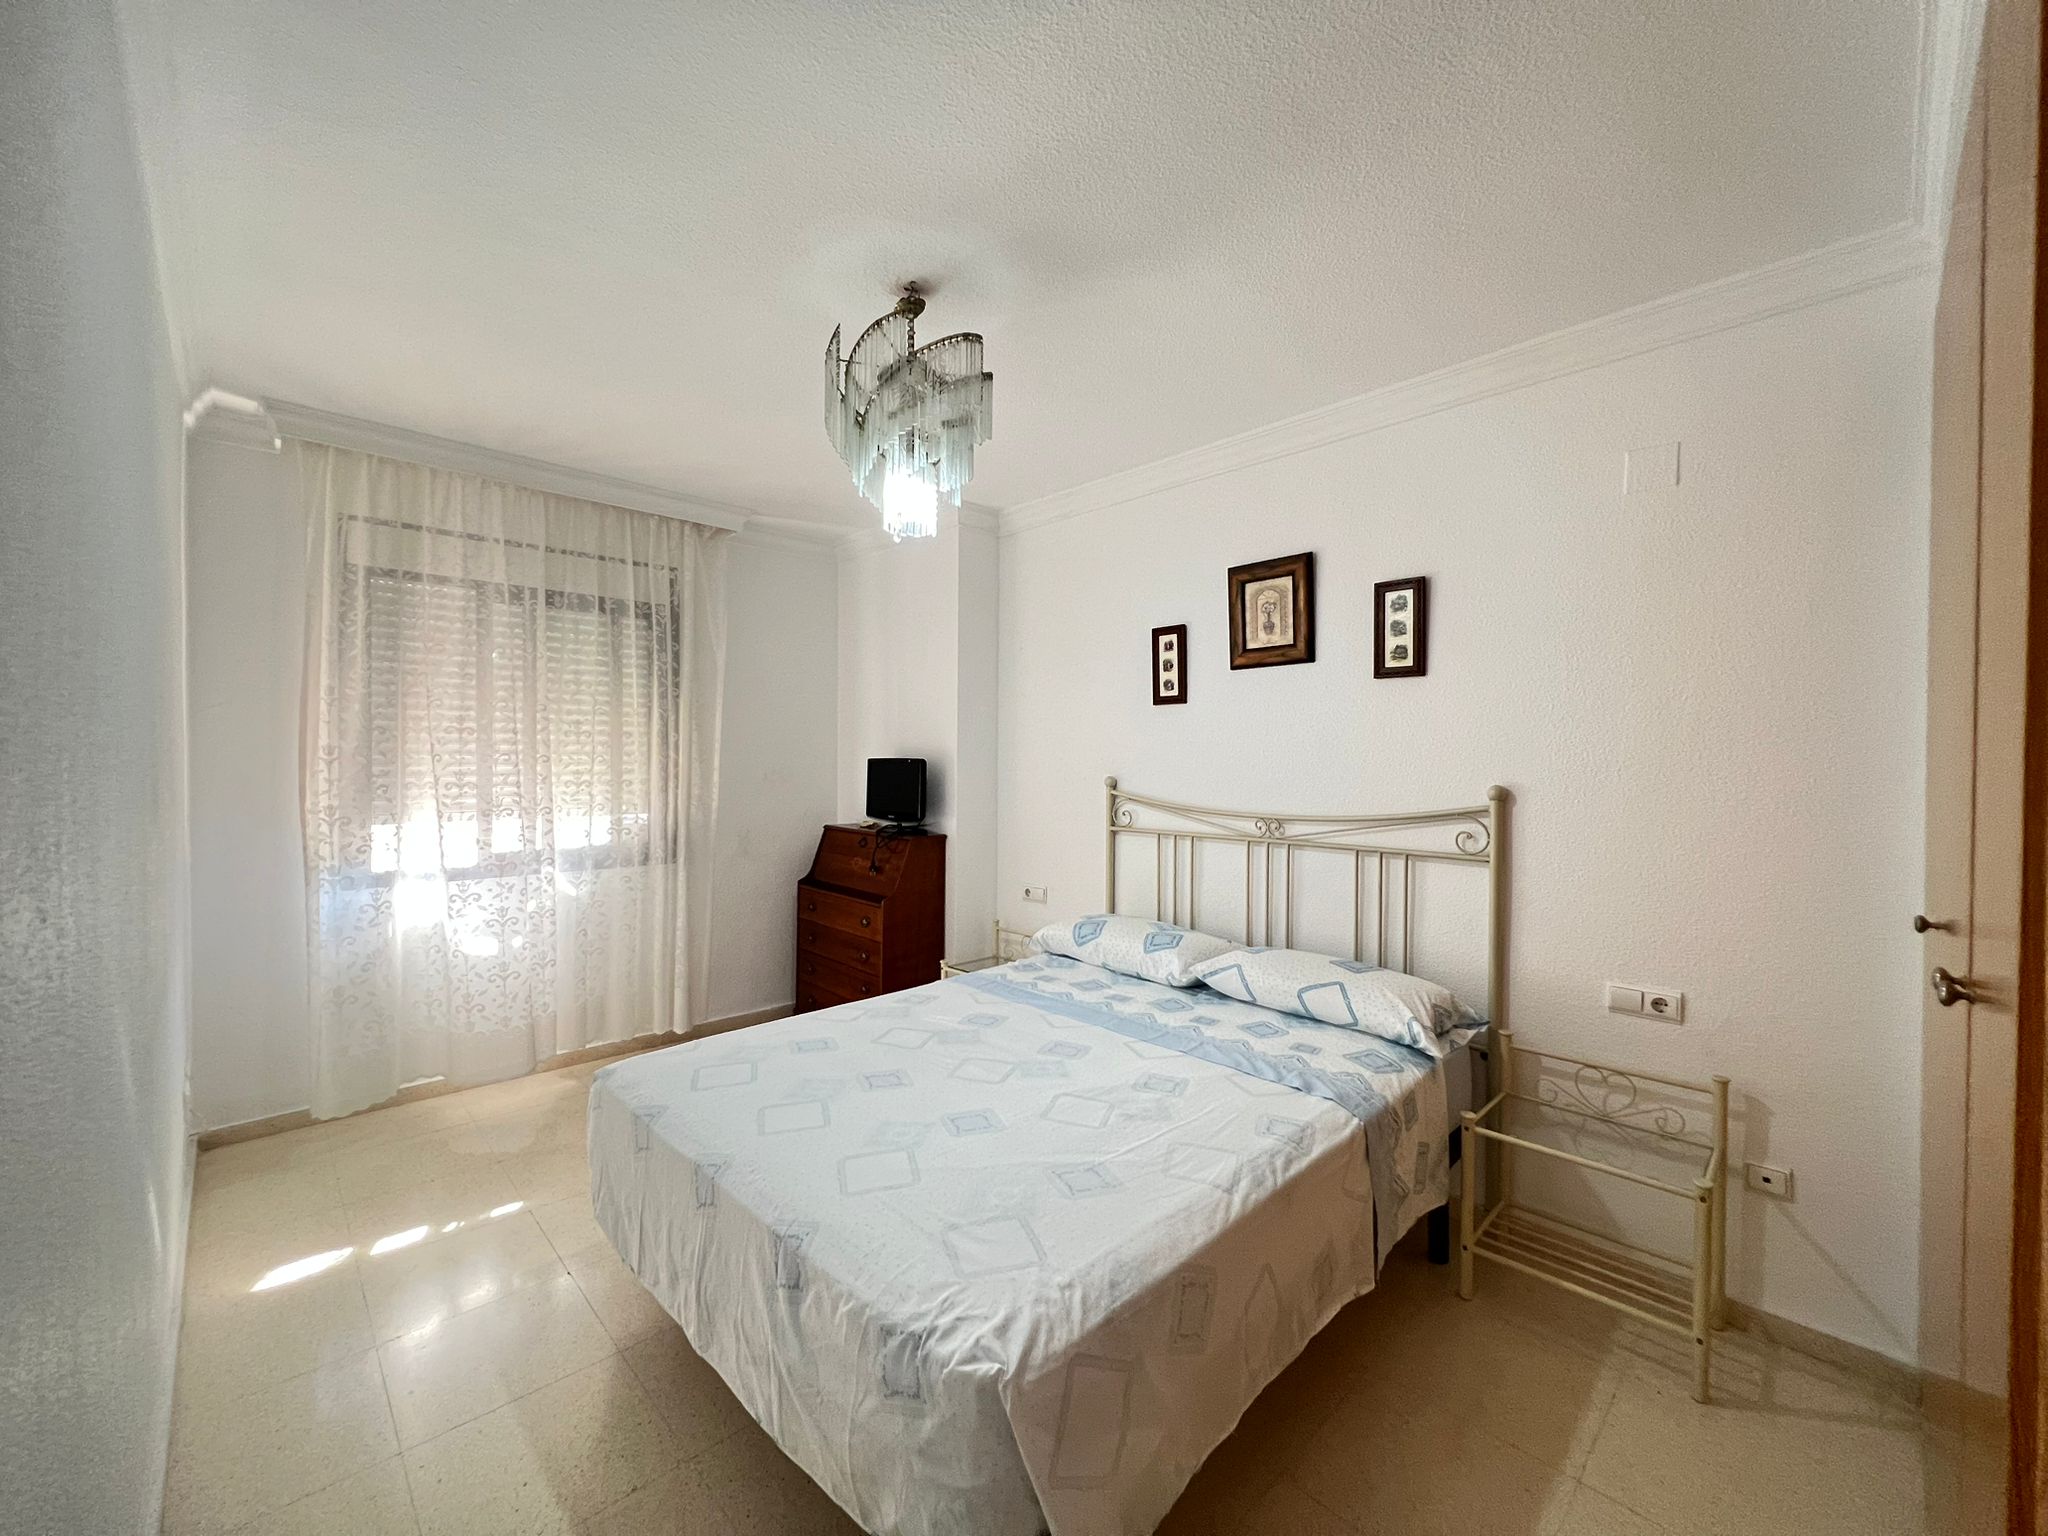 Apartment for sale in the center of Calpe within walking distance of the beaches